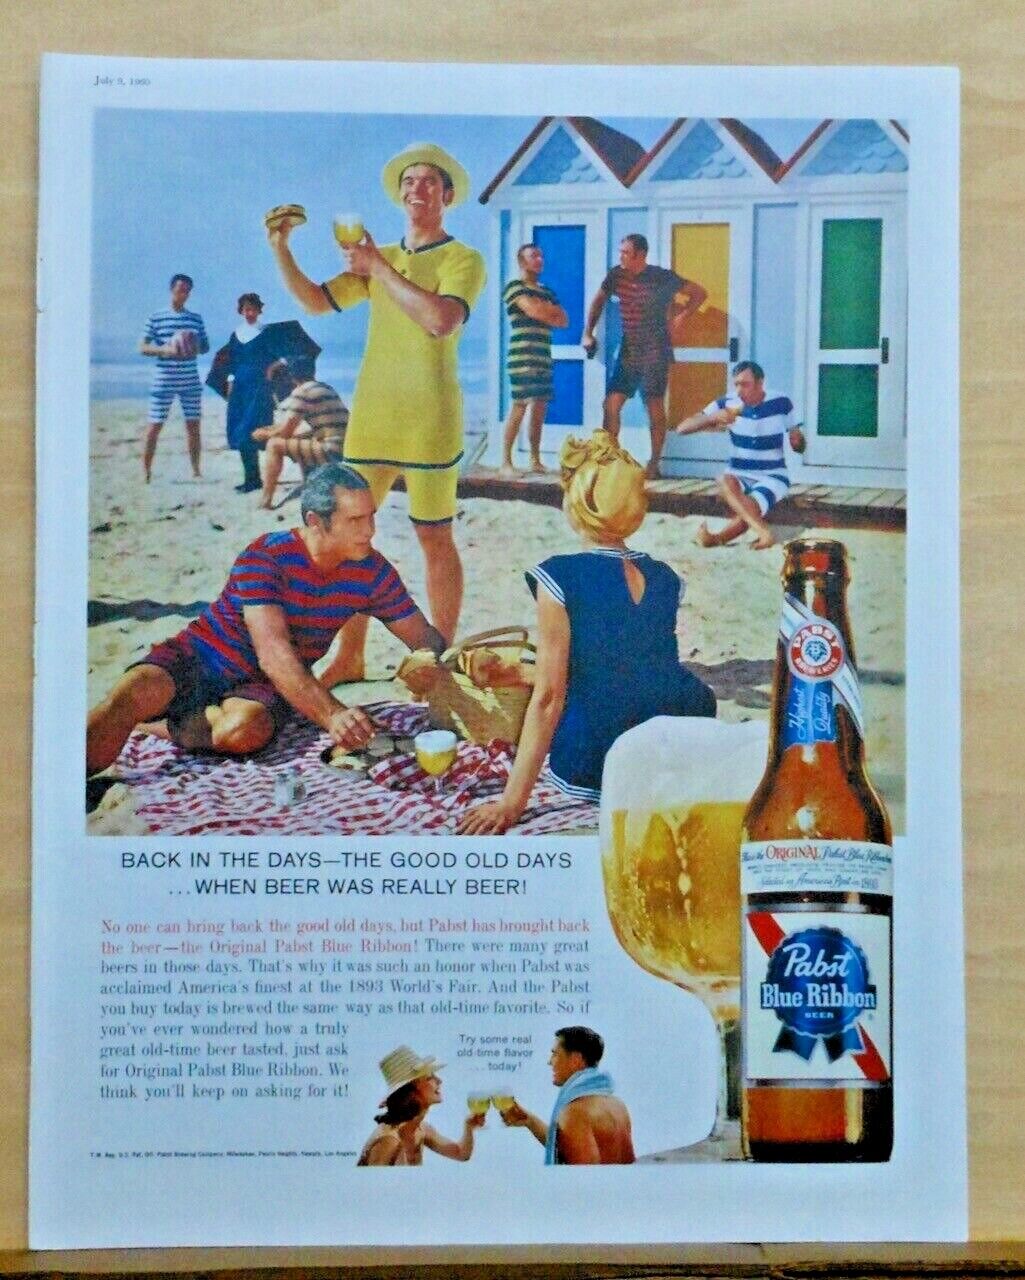 1960 magazine ad for Pabst Blue Ribbon - Old Timey 1890's fun at beach